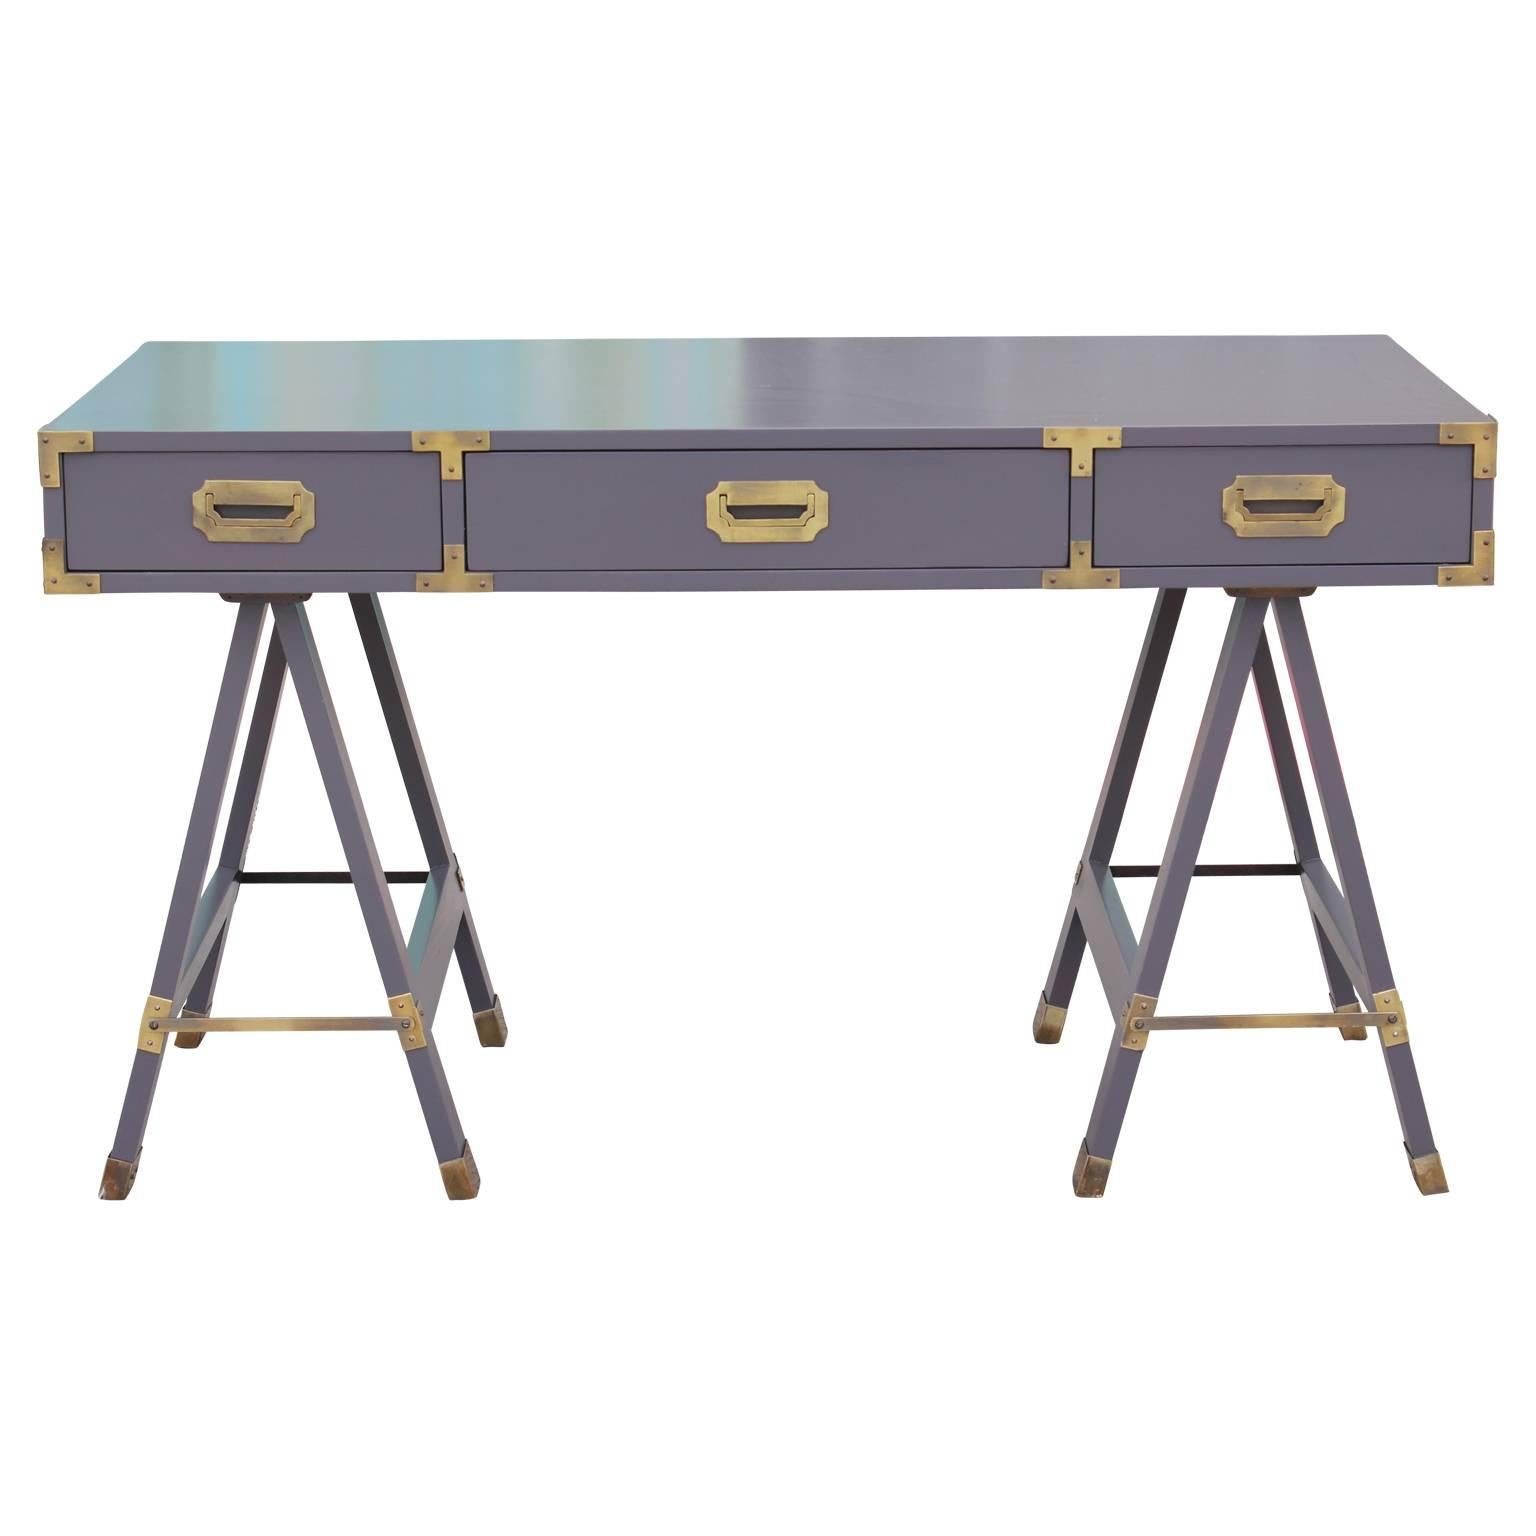 Beautiful Campaign desk in the style of Baker furniture. Freshly lacquered in a deep grey and with brass detailing with a lovely patina. Features three drawers in the front and faux drawers on the side with brass detailing as well. Could be used as